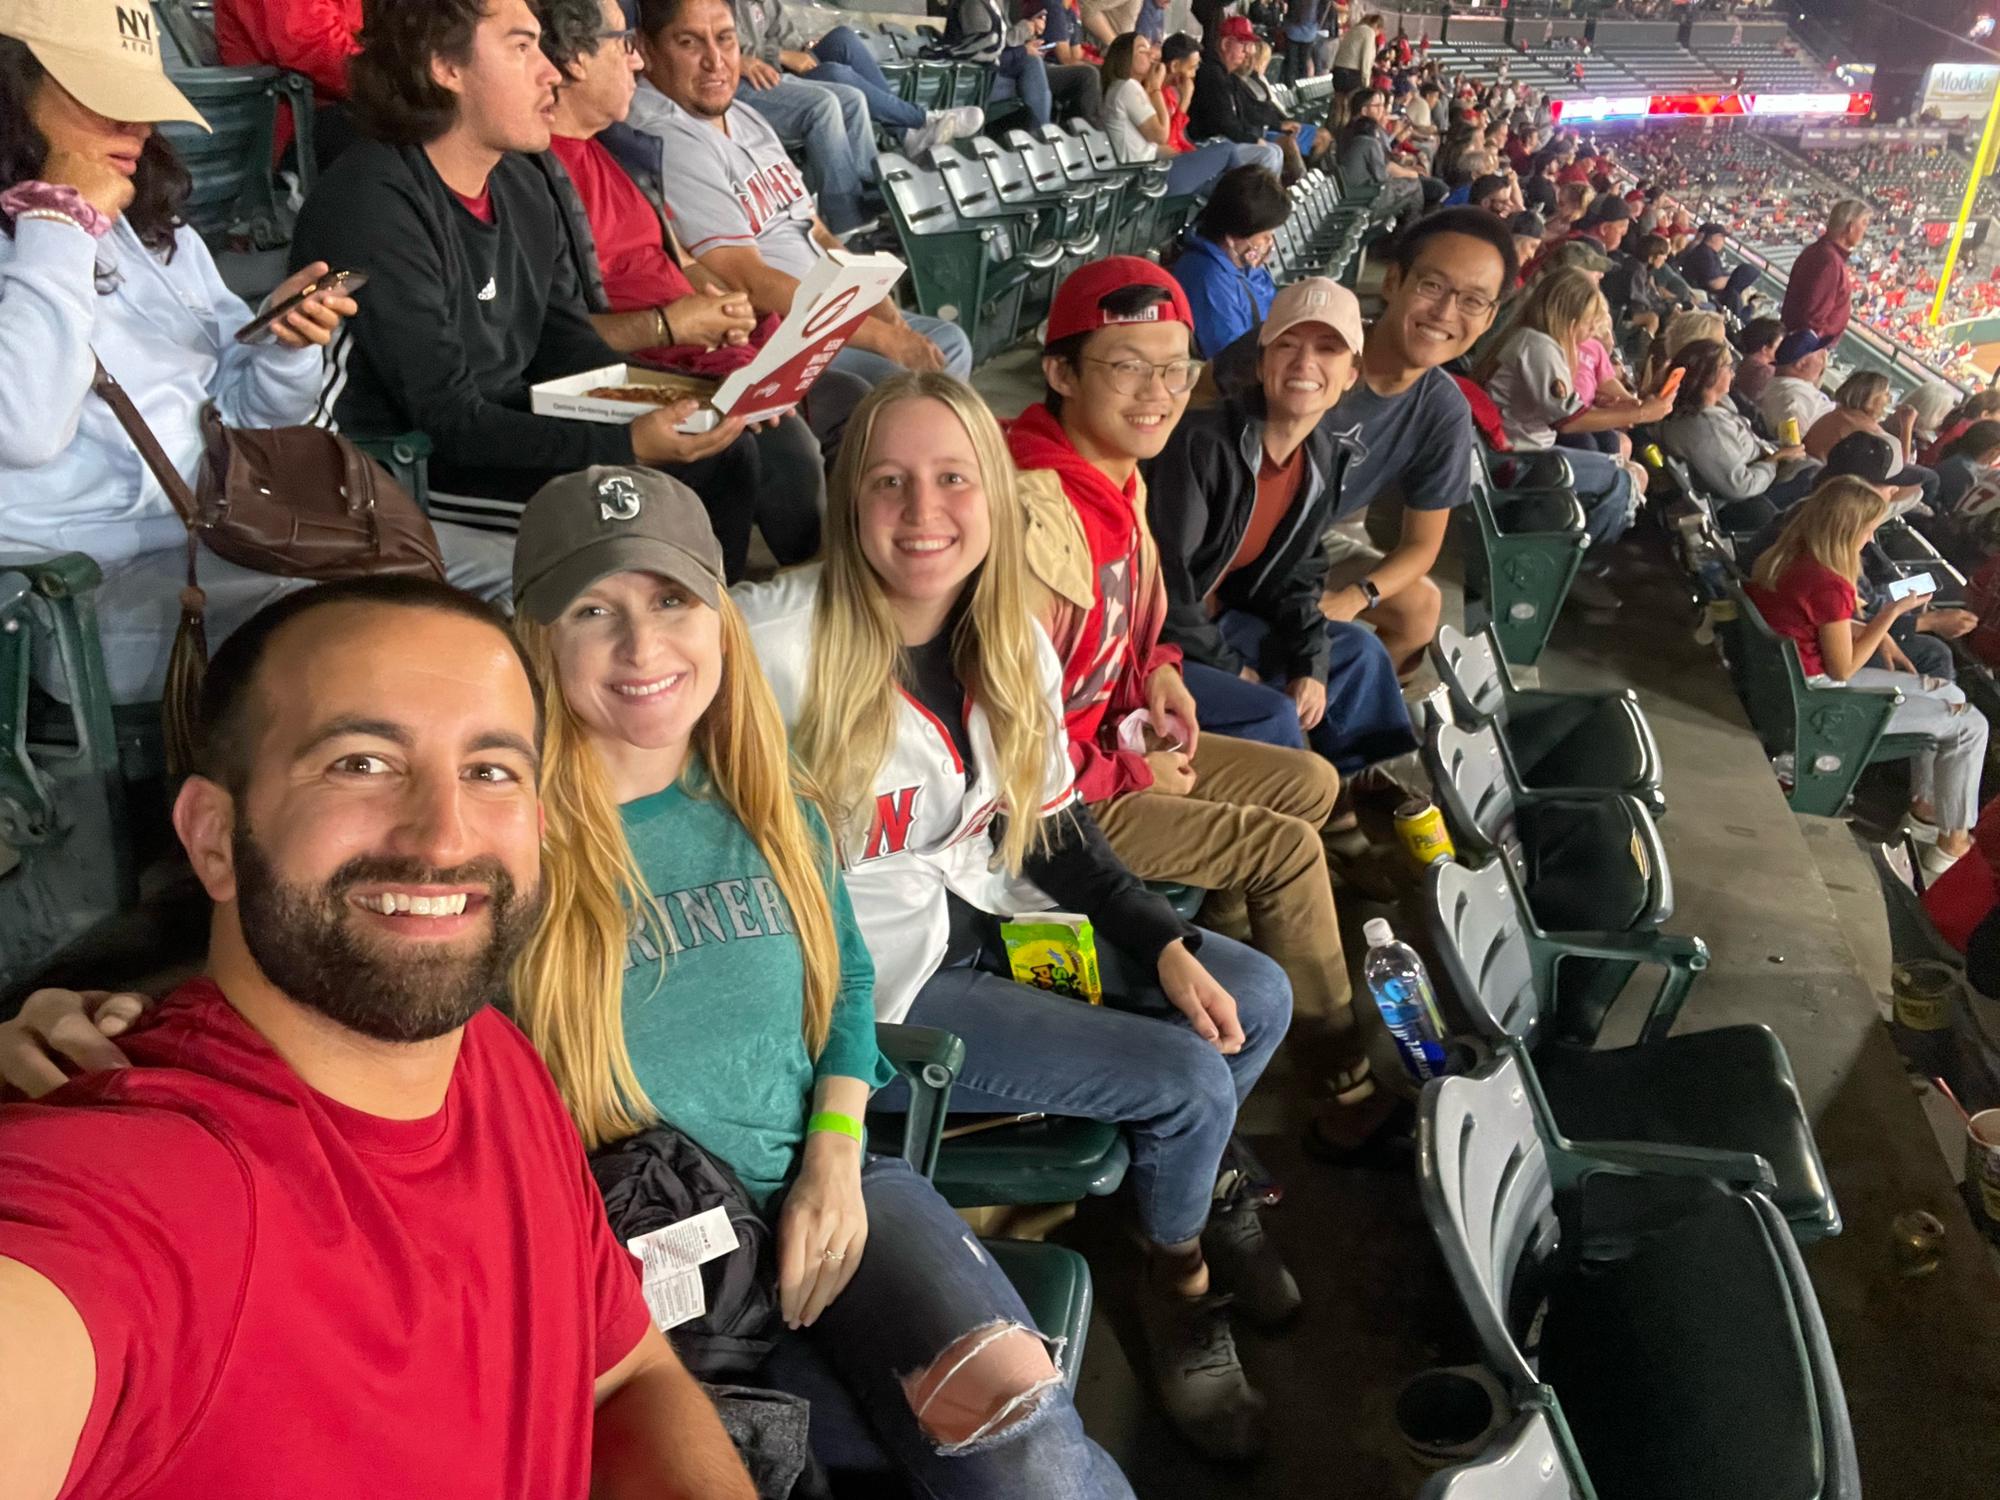 Angels game with our law school besties and trivia team (the Pizza Pirates :))